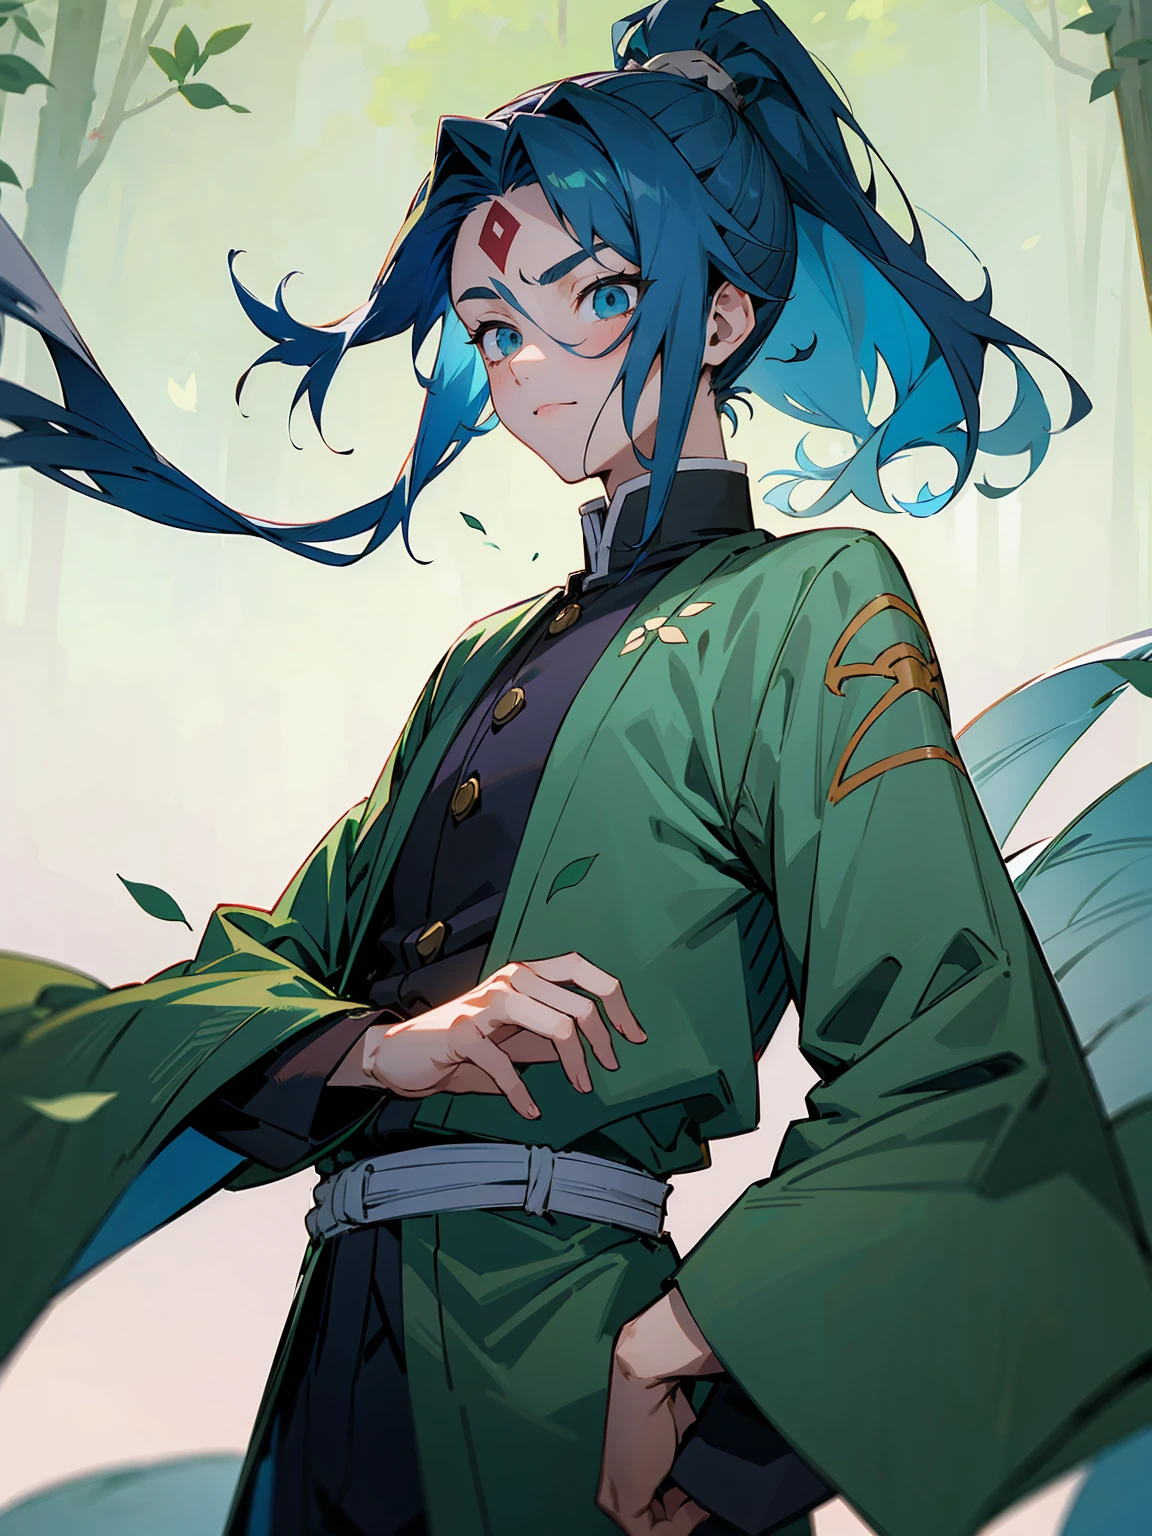 1male, Adult, Deep Blue Hair, Medium Length Hair, White Inner Hair, Ponytail, Haori With Leaves On It, Green Face Mark, Forest Background, Standing in Forest, Demon Slayer Uniform